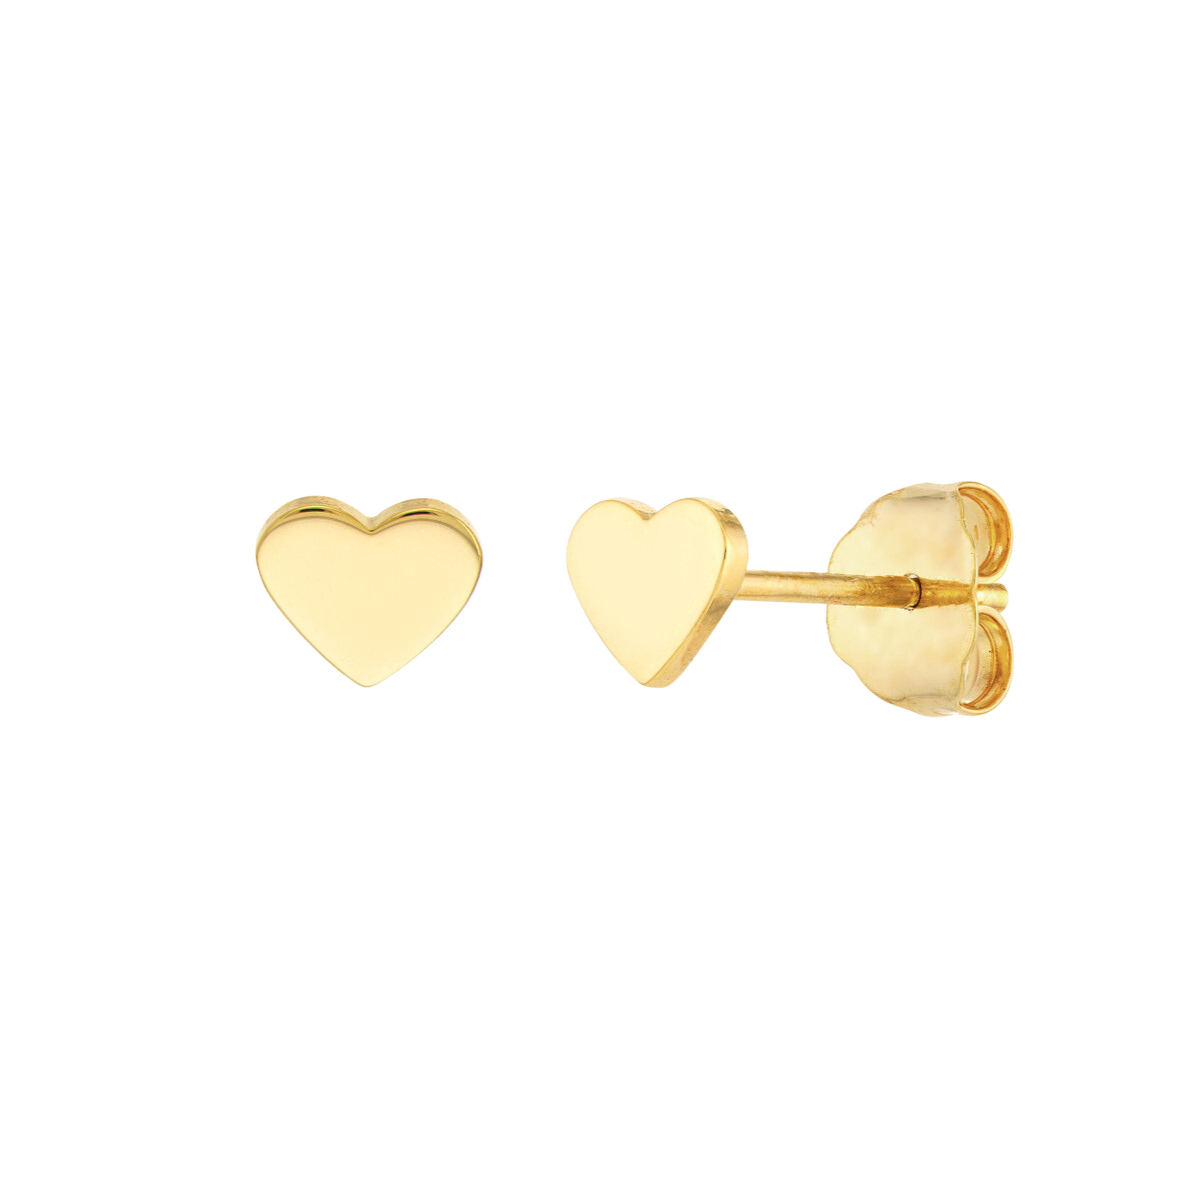 Buy 14k Gold Heart Earrings Solid Gold Studs Small Heart Earrings  Valentines Day Gift Online in India - Etsy